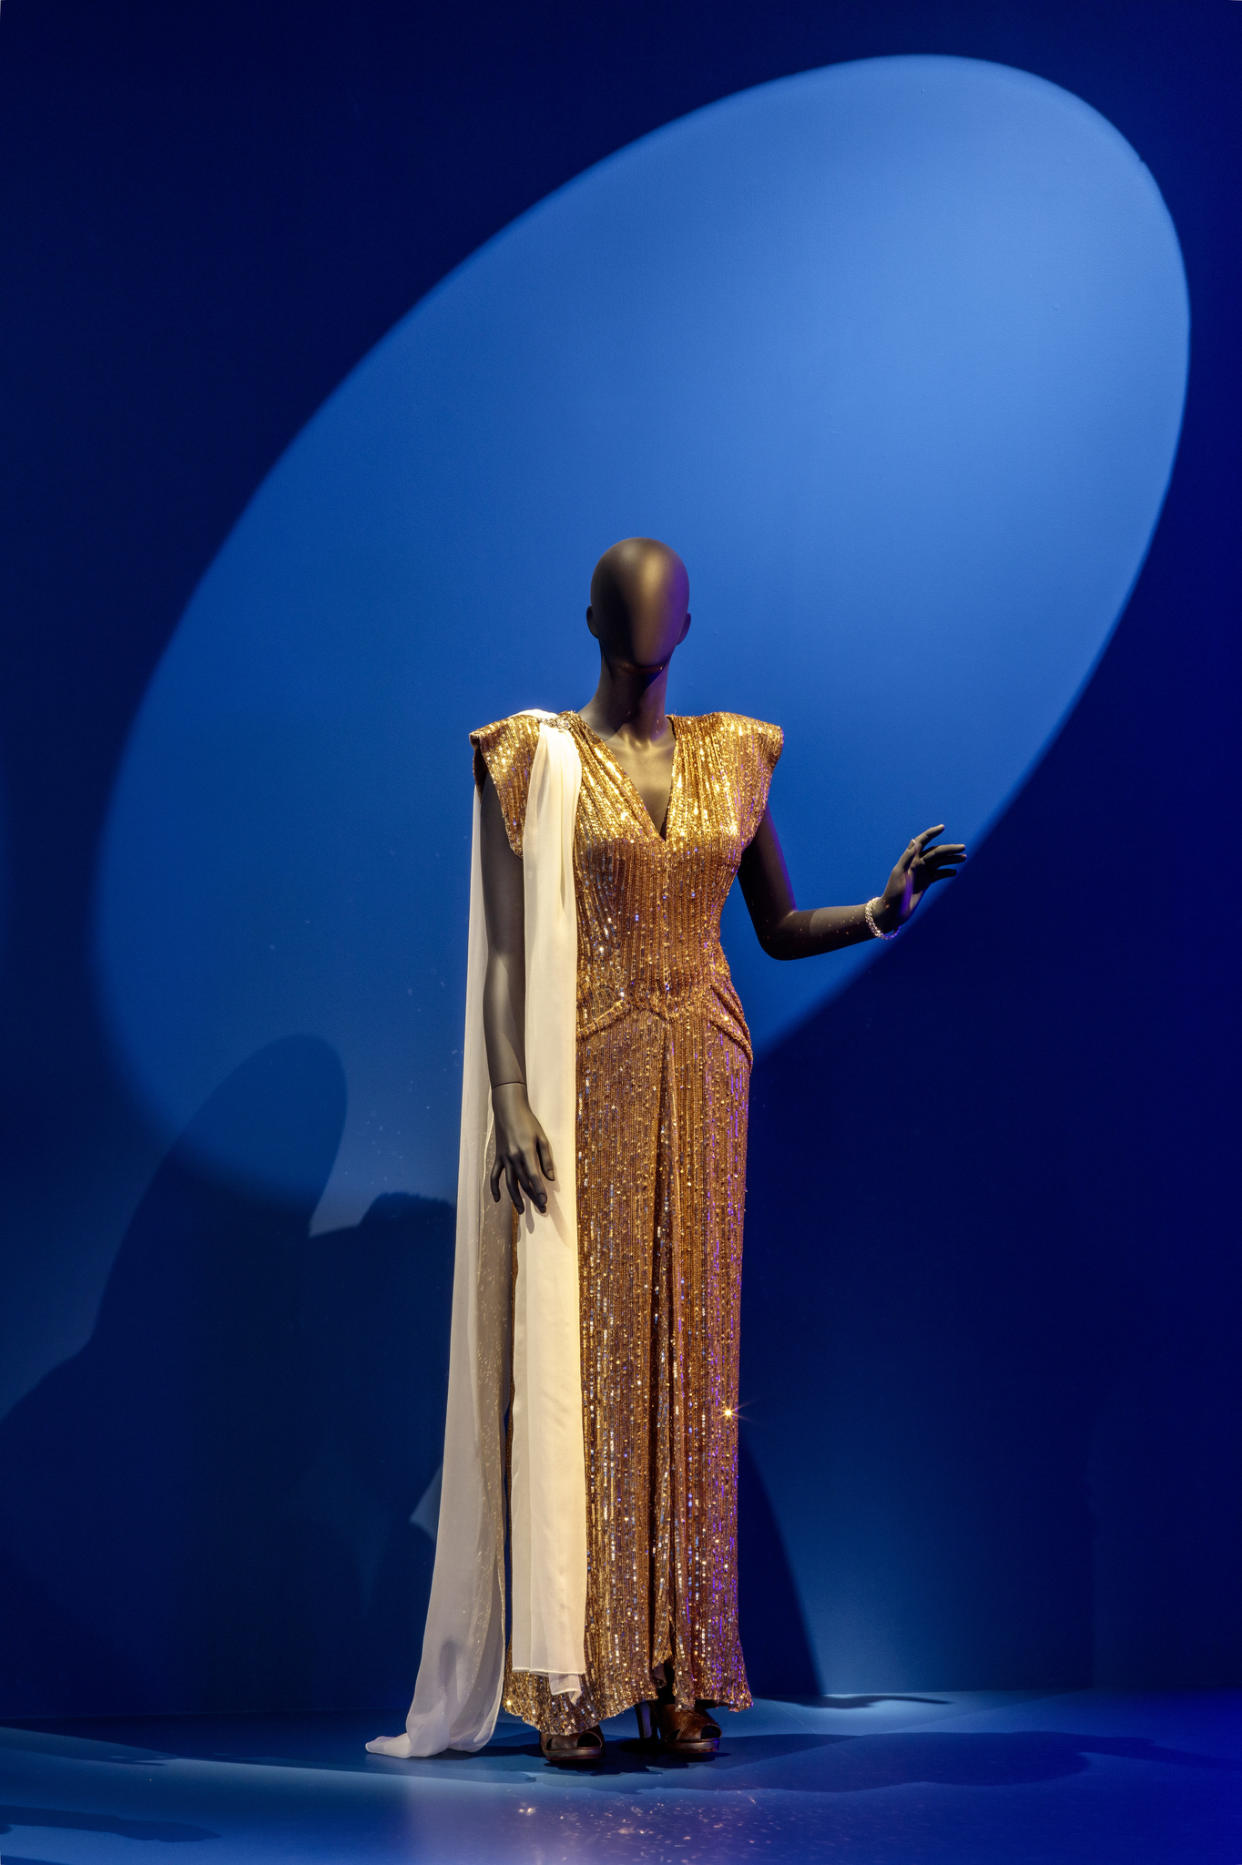 Costume worn by Lena Horne in “Stormy Weather” (1943). Collection of Greg Schreiner. Stars and Icons, “Regeneration: Black Cinema 1898-1971,” Academy Museum of Motion Pictures. - Credit: Joshua White, JW Pictures/ © Academy Museum Foundation/Courtesy